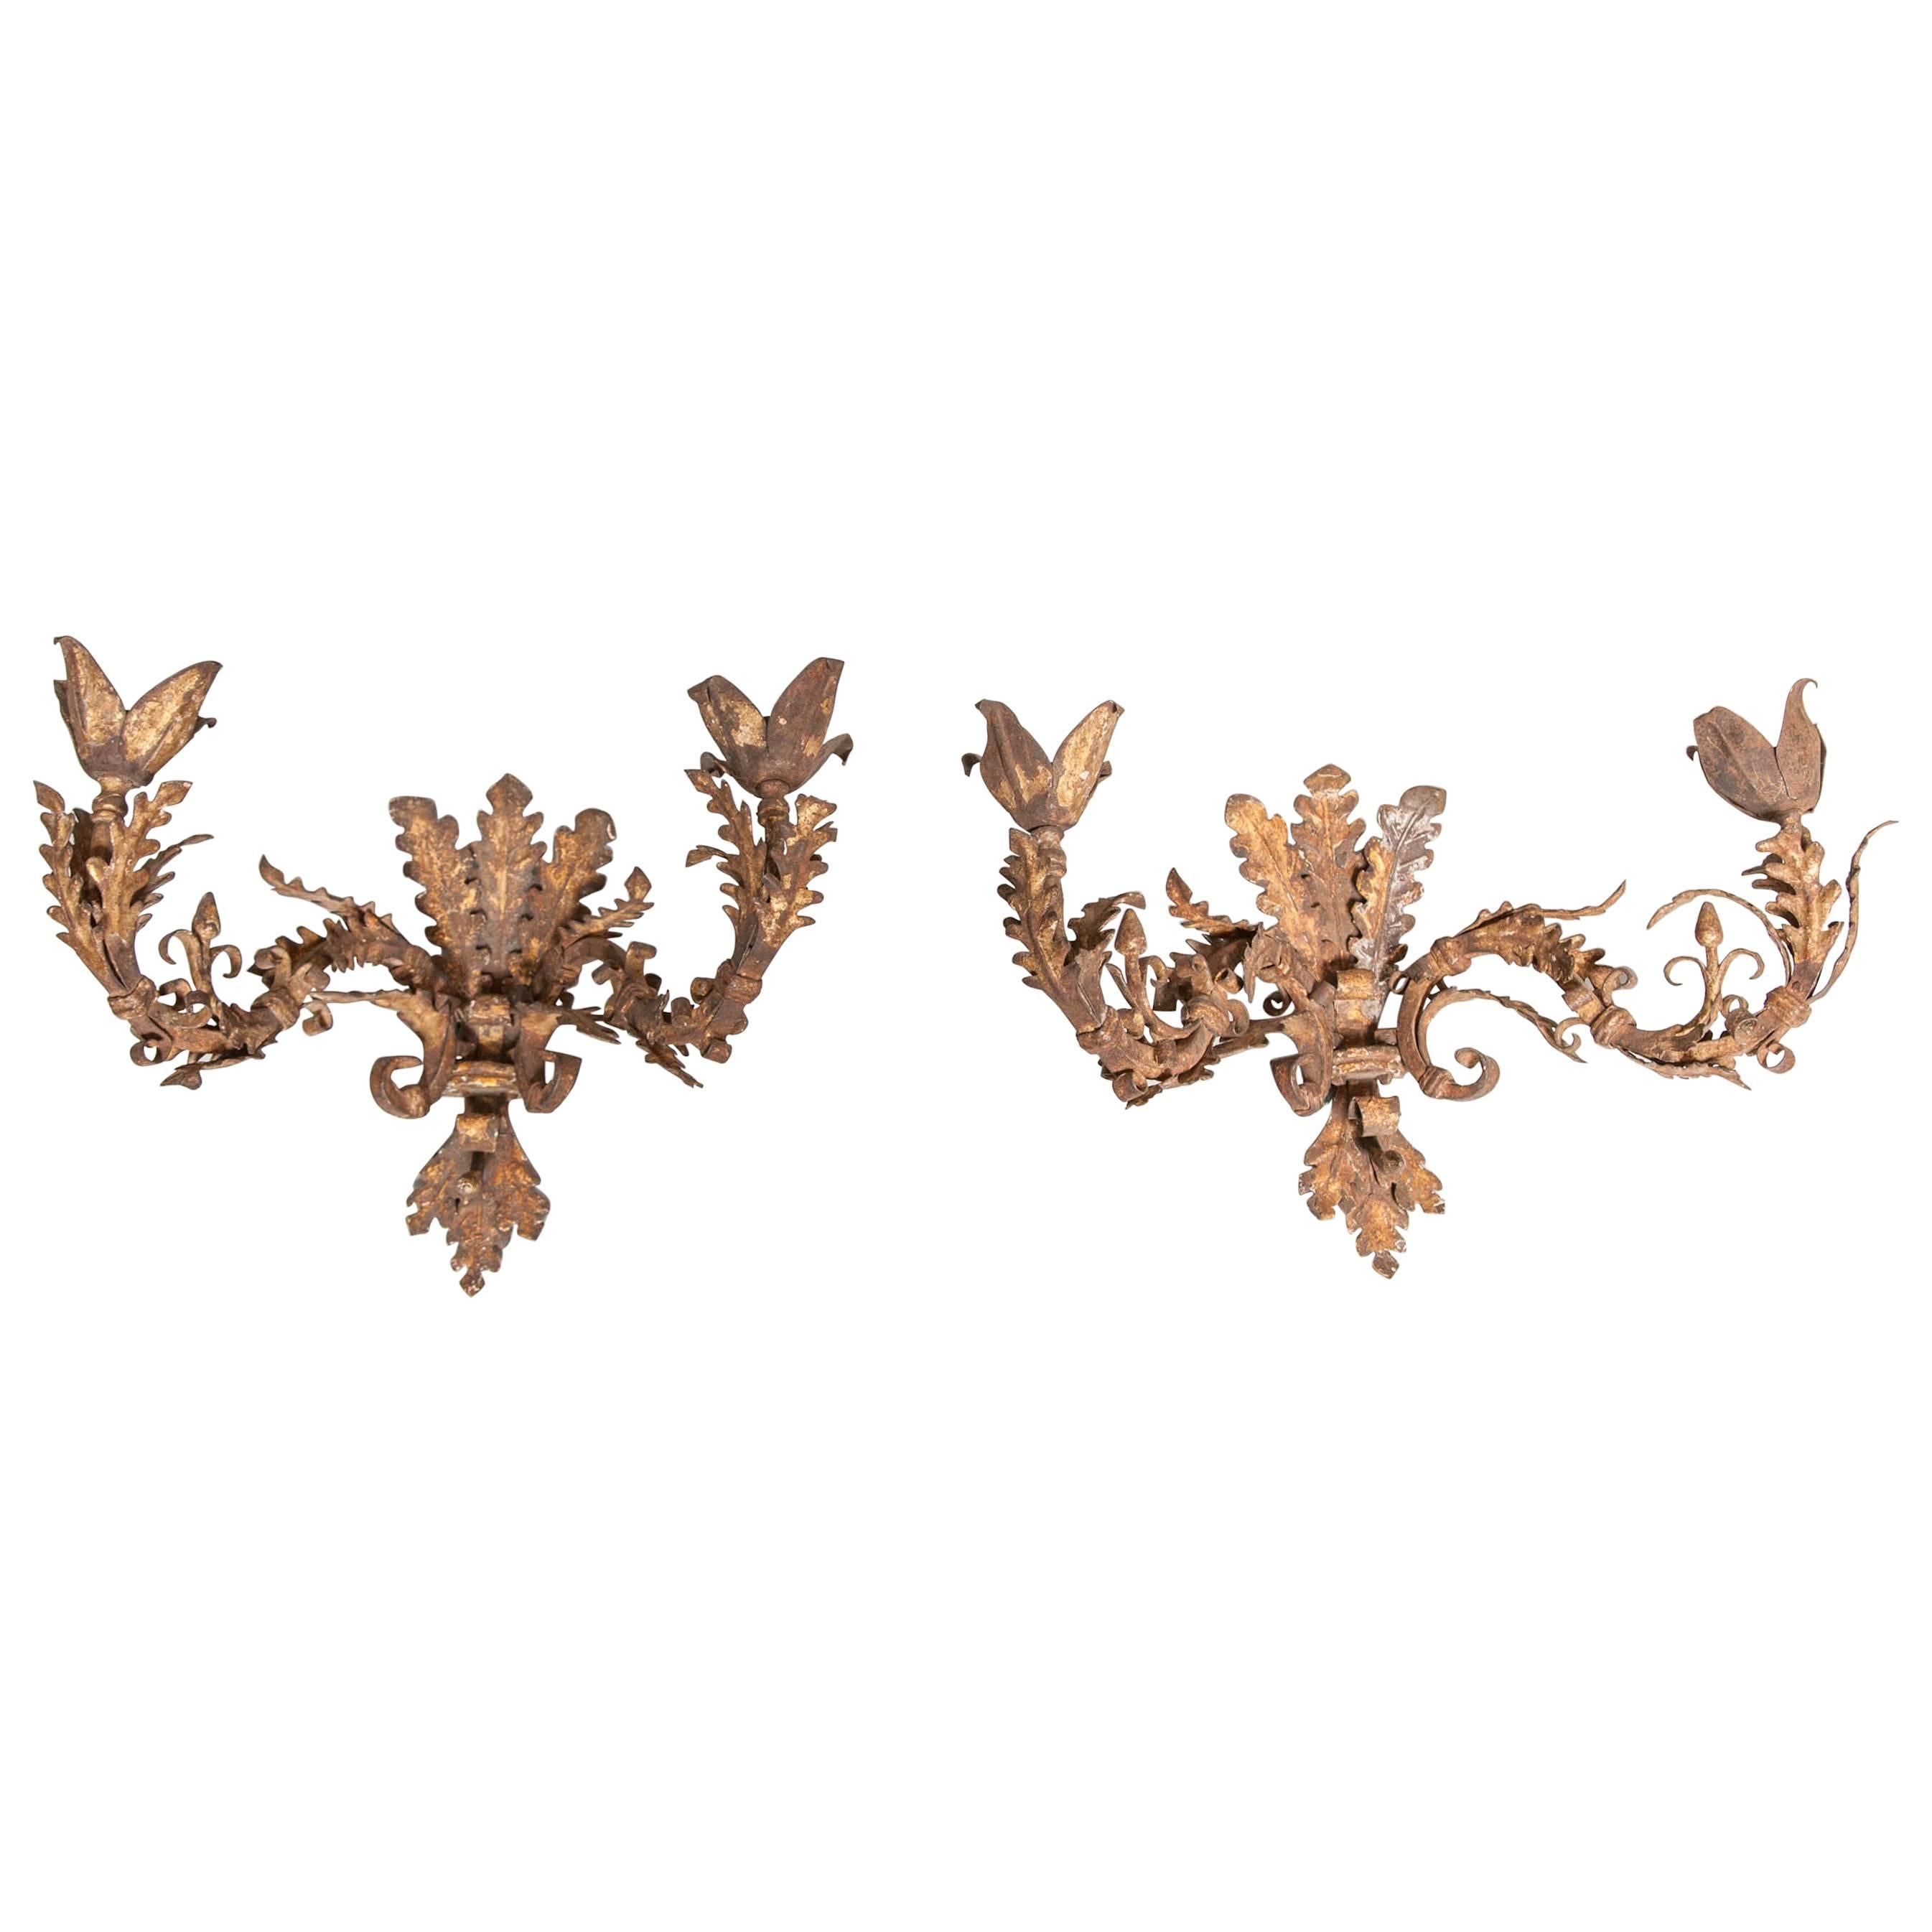 Pair of Italian Gilded Wrought Iron Wall Lights, Appliques, circa 1650 For Sale